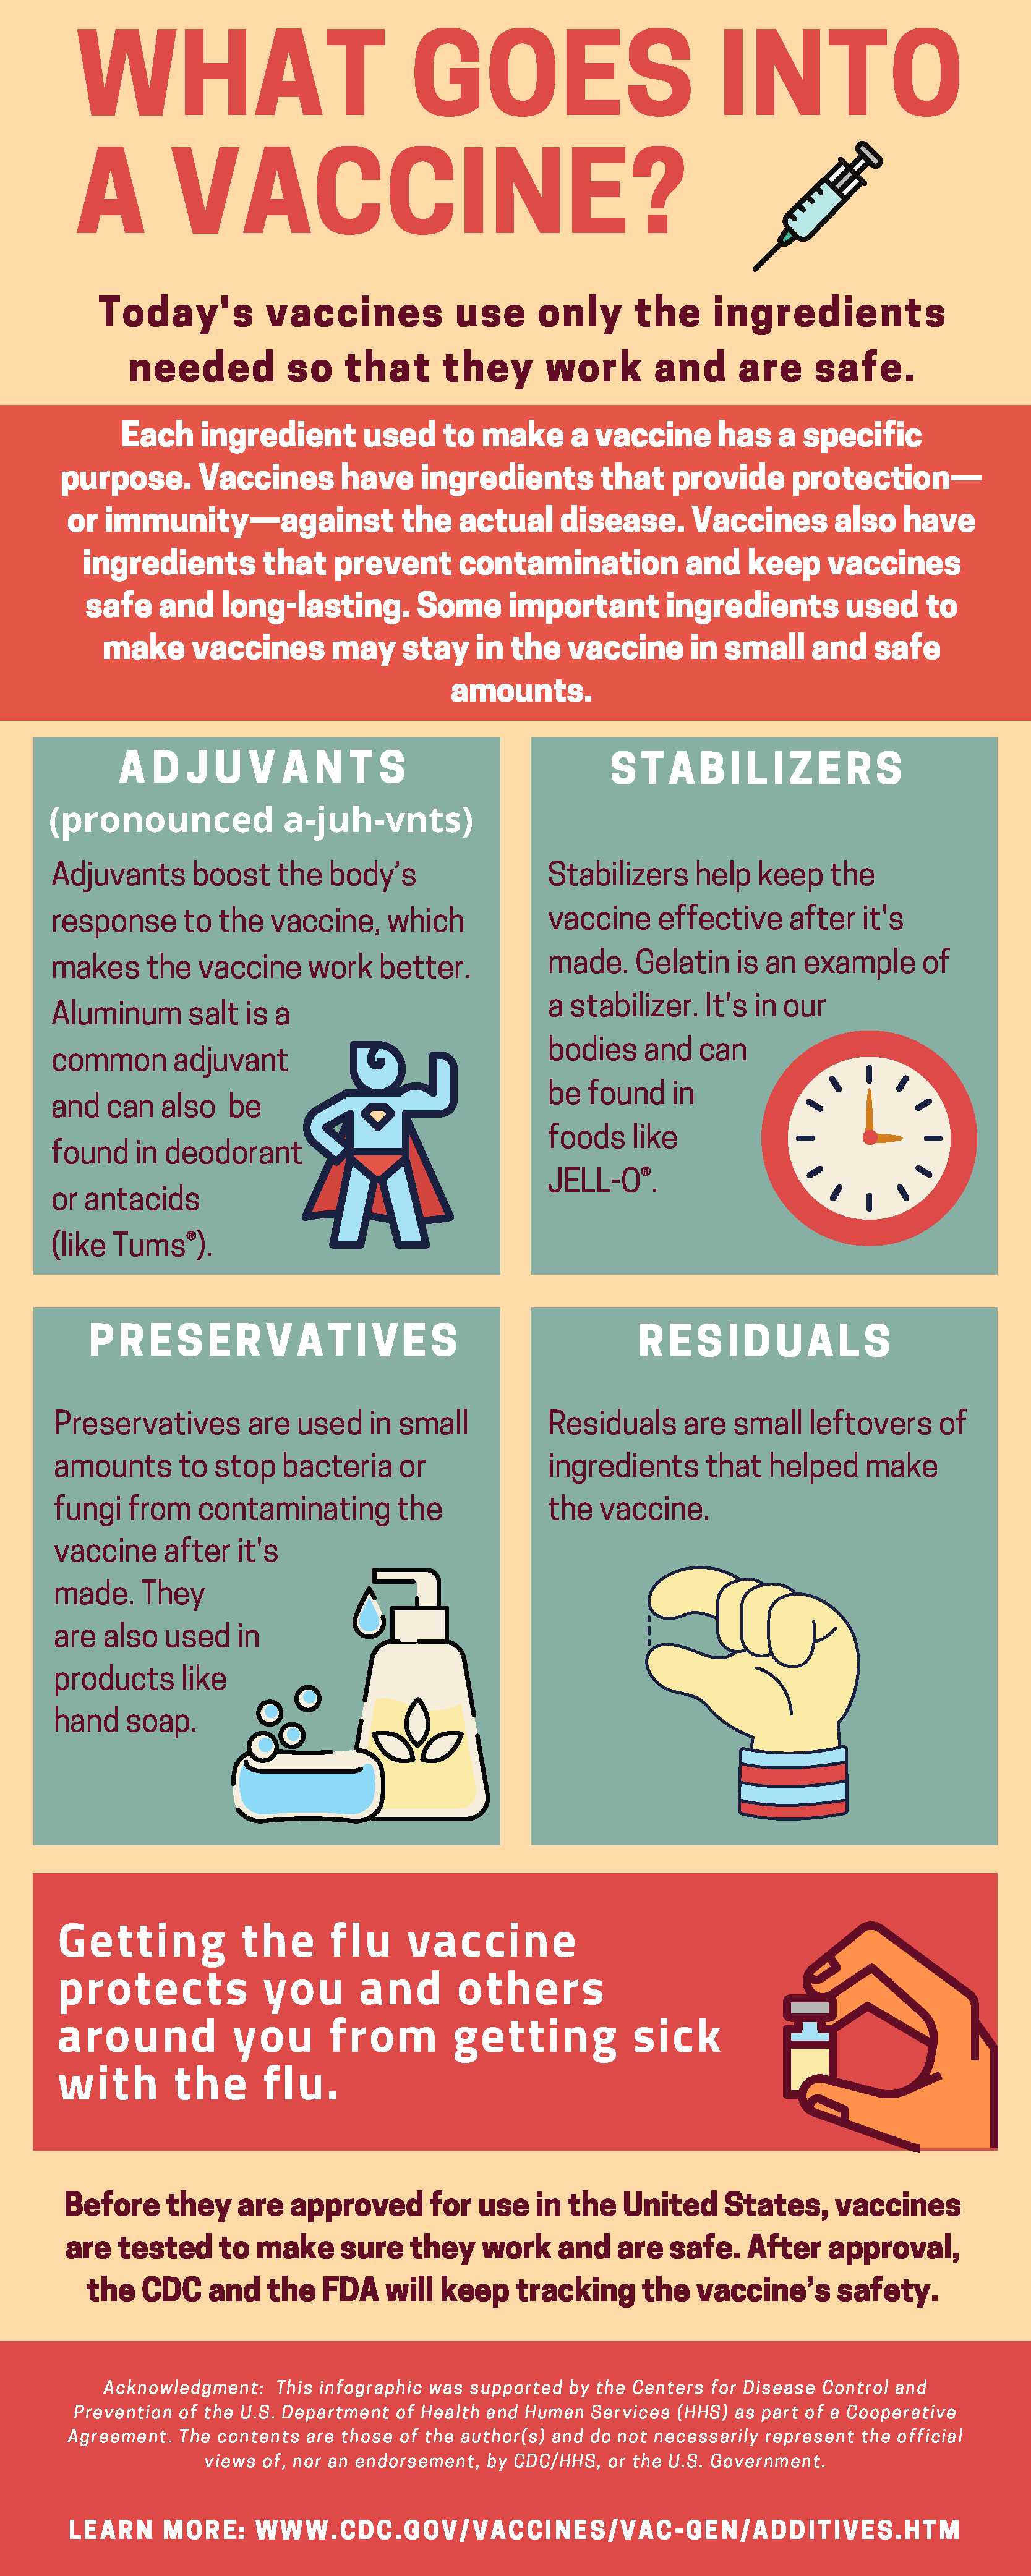 infographic-what-goes-into-a-vaccine-association-of-immunization